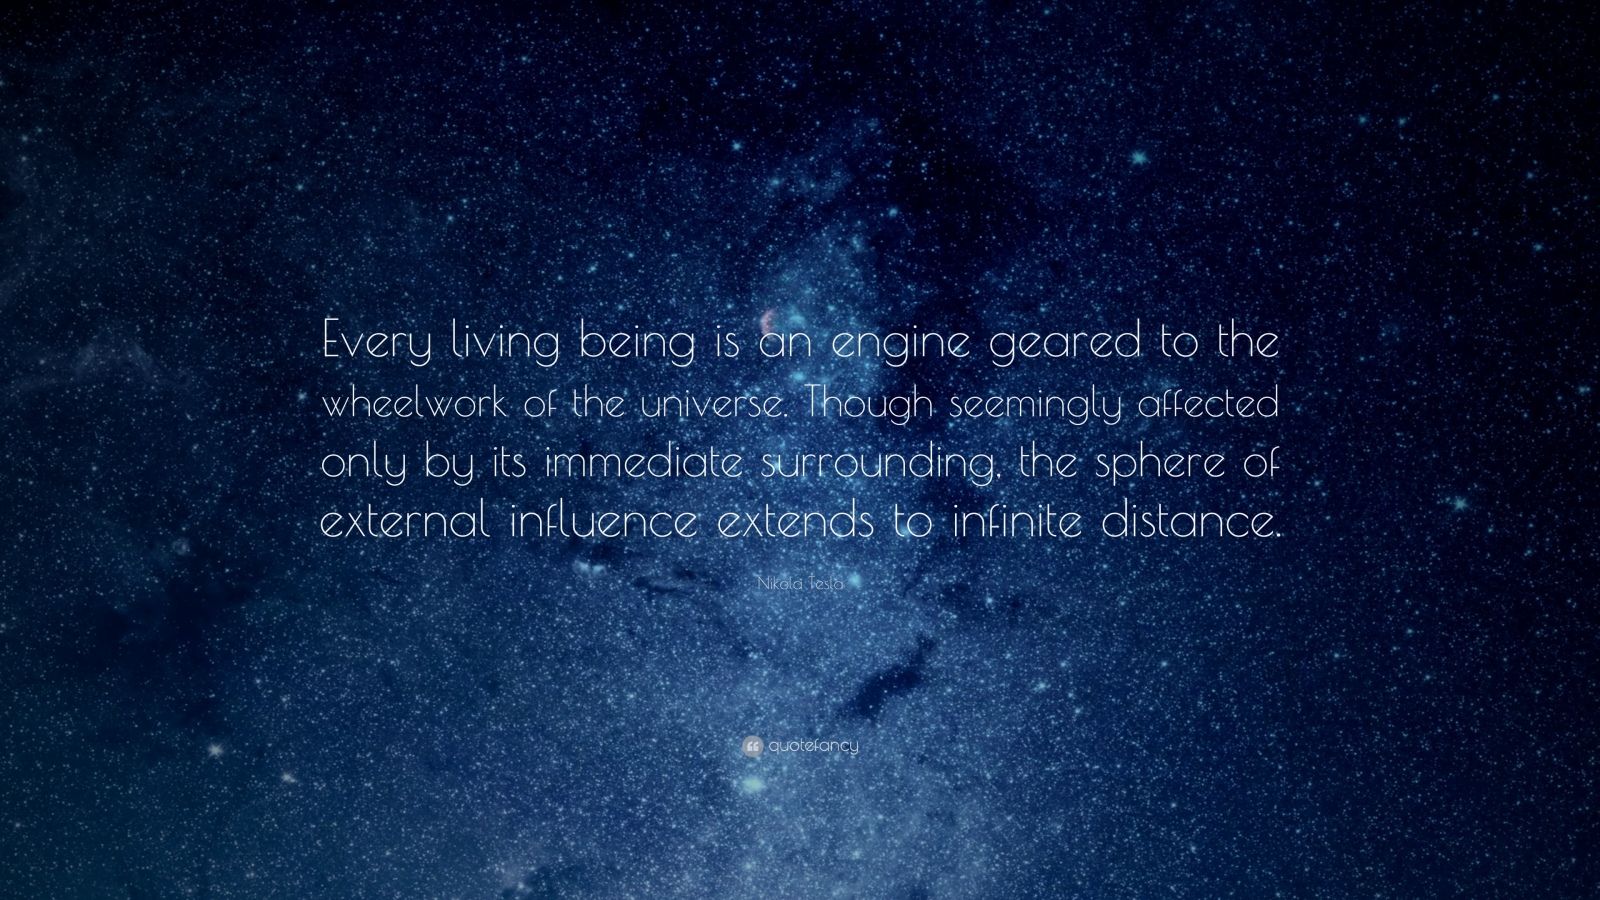 Nikola Tesla Quote: “Every living being is an engine geared to the  wheelwork of the universe. Though seemingly affected only by its  immediate...”